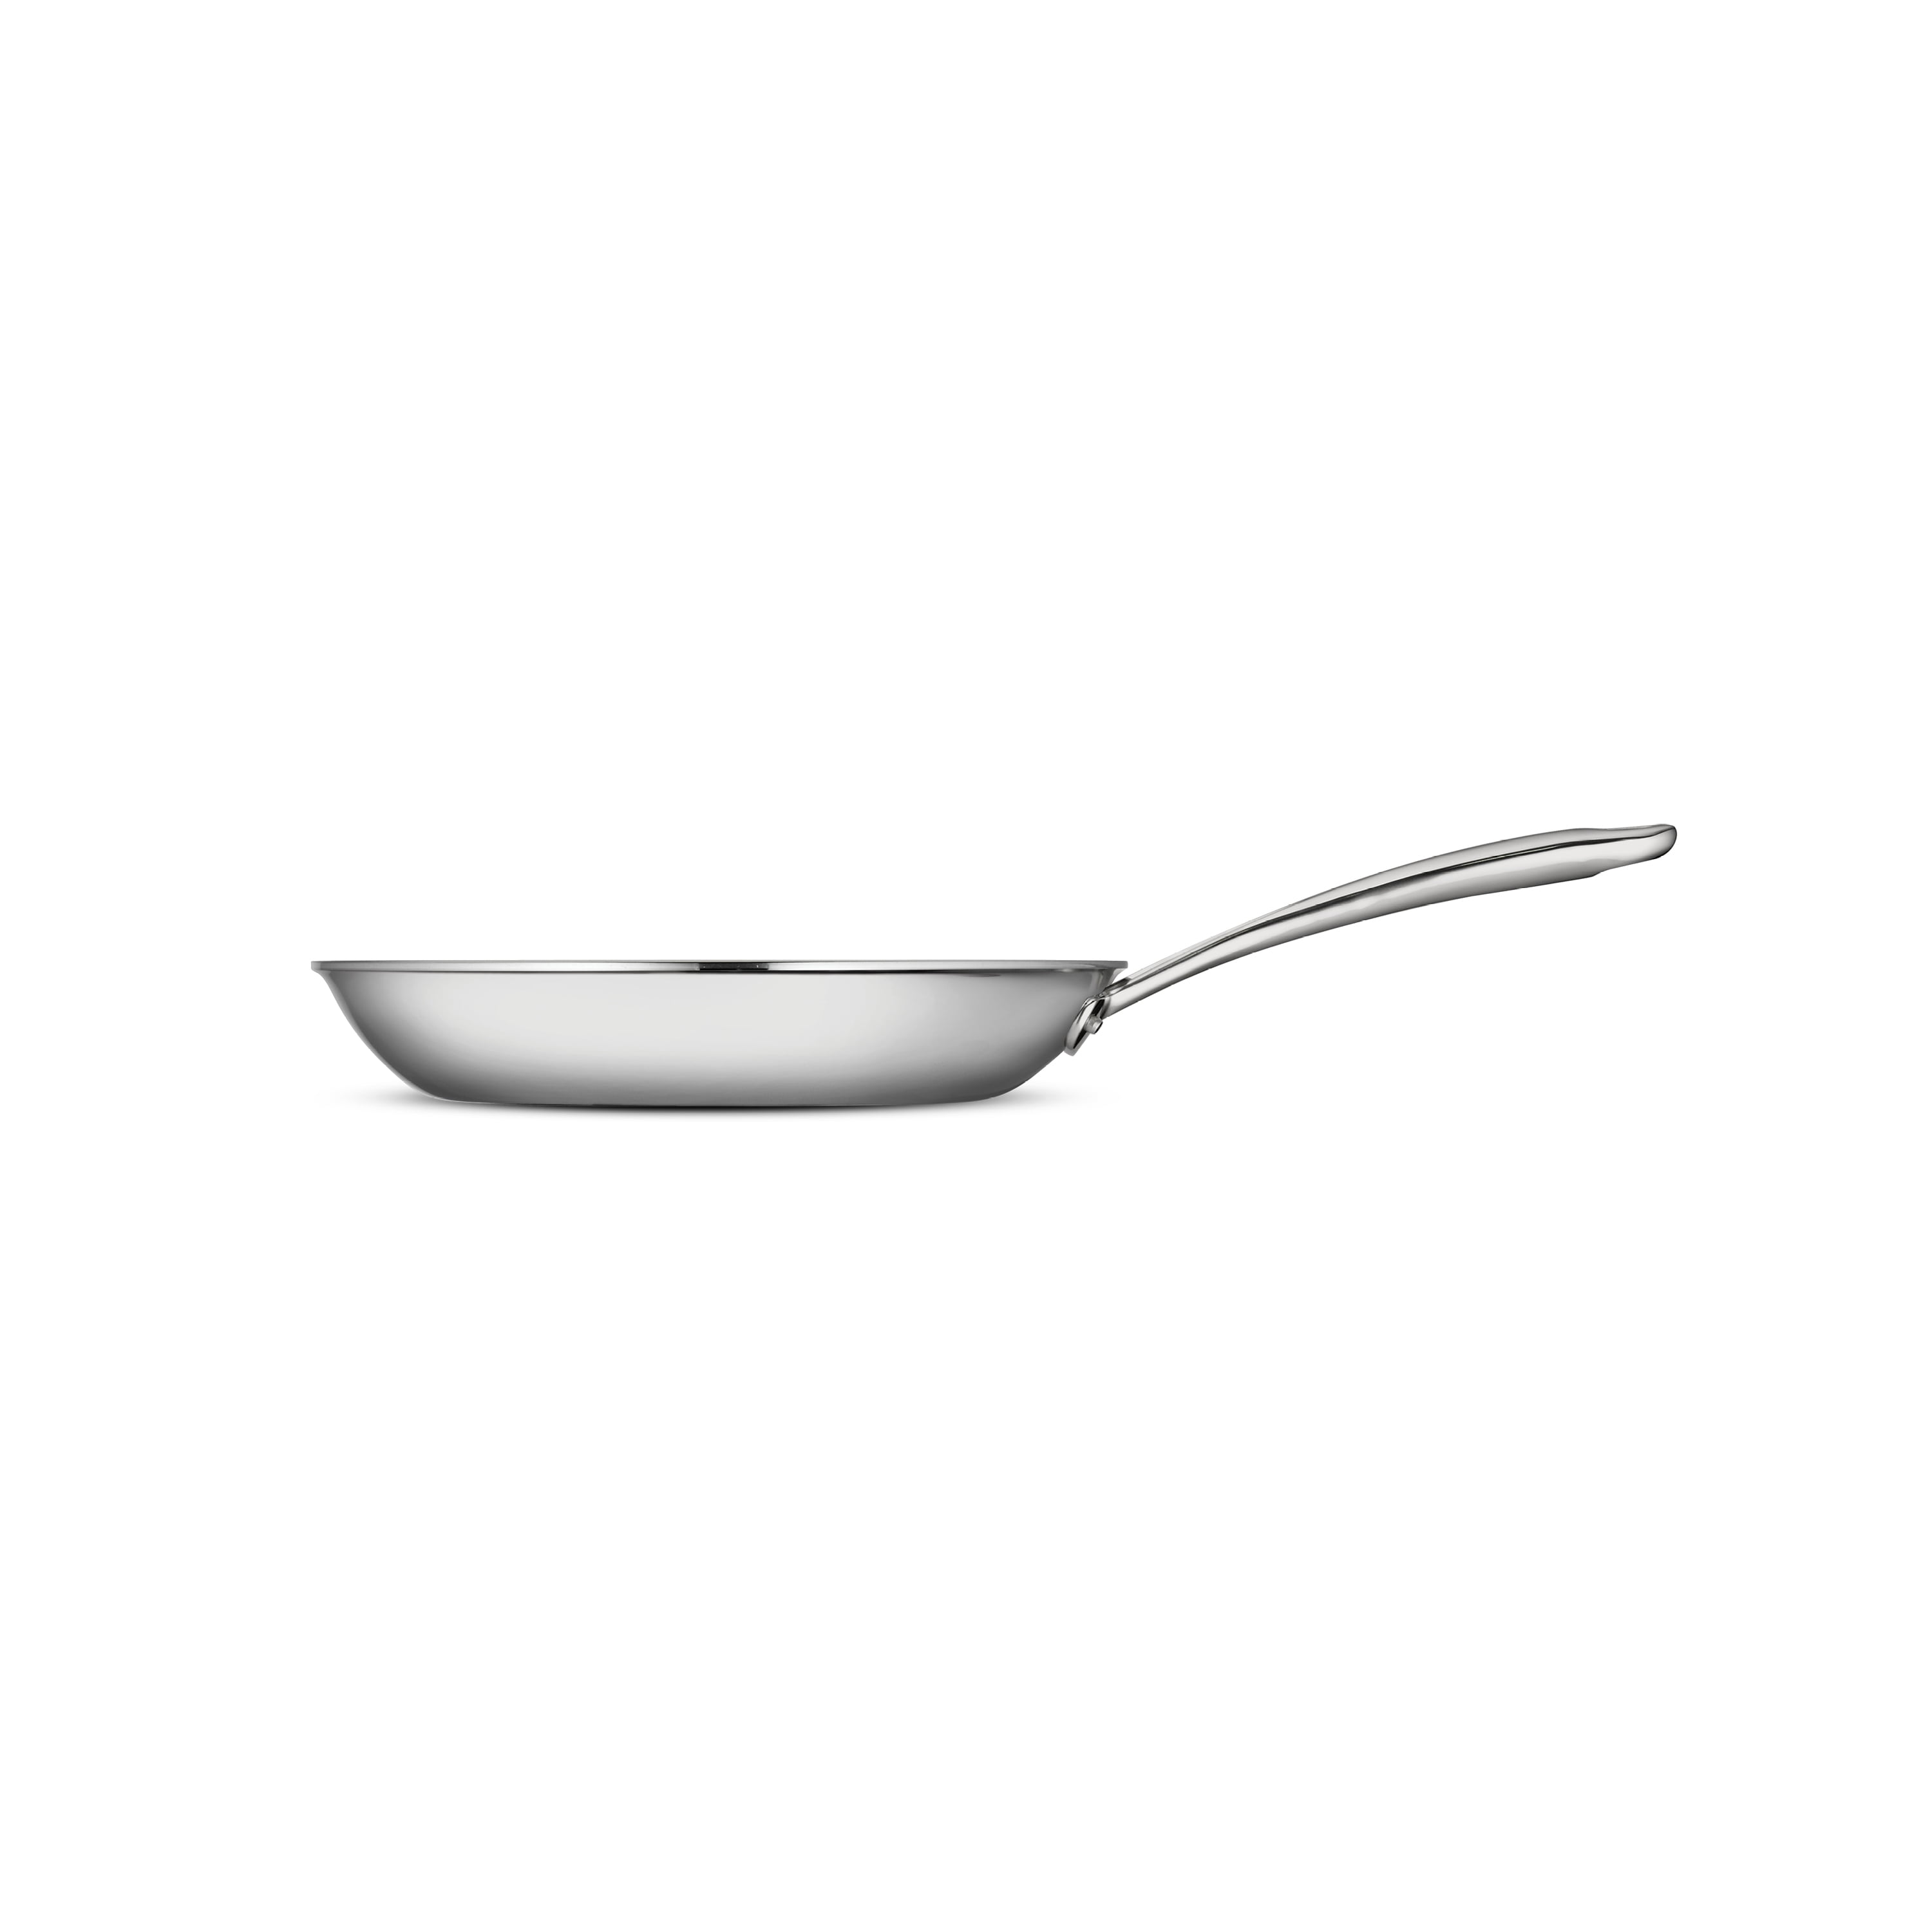 Tramontina Gourmet Tri-Ply Clad Frying Pan, 10 in - Jay C Food Stores